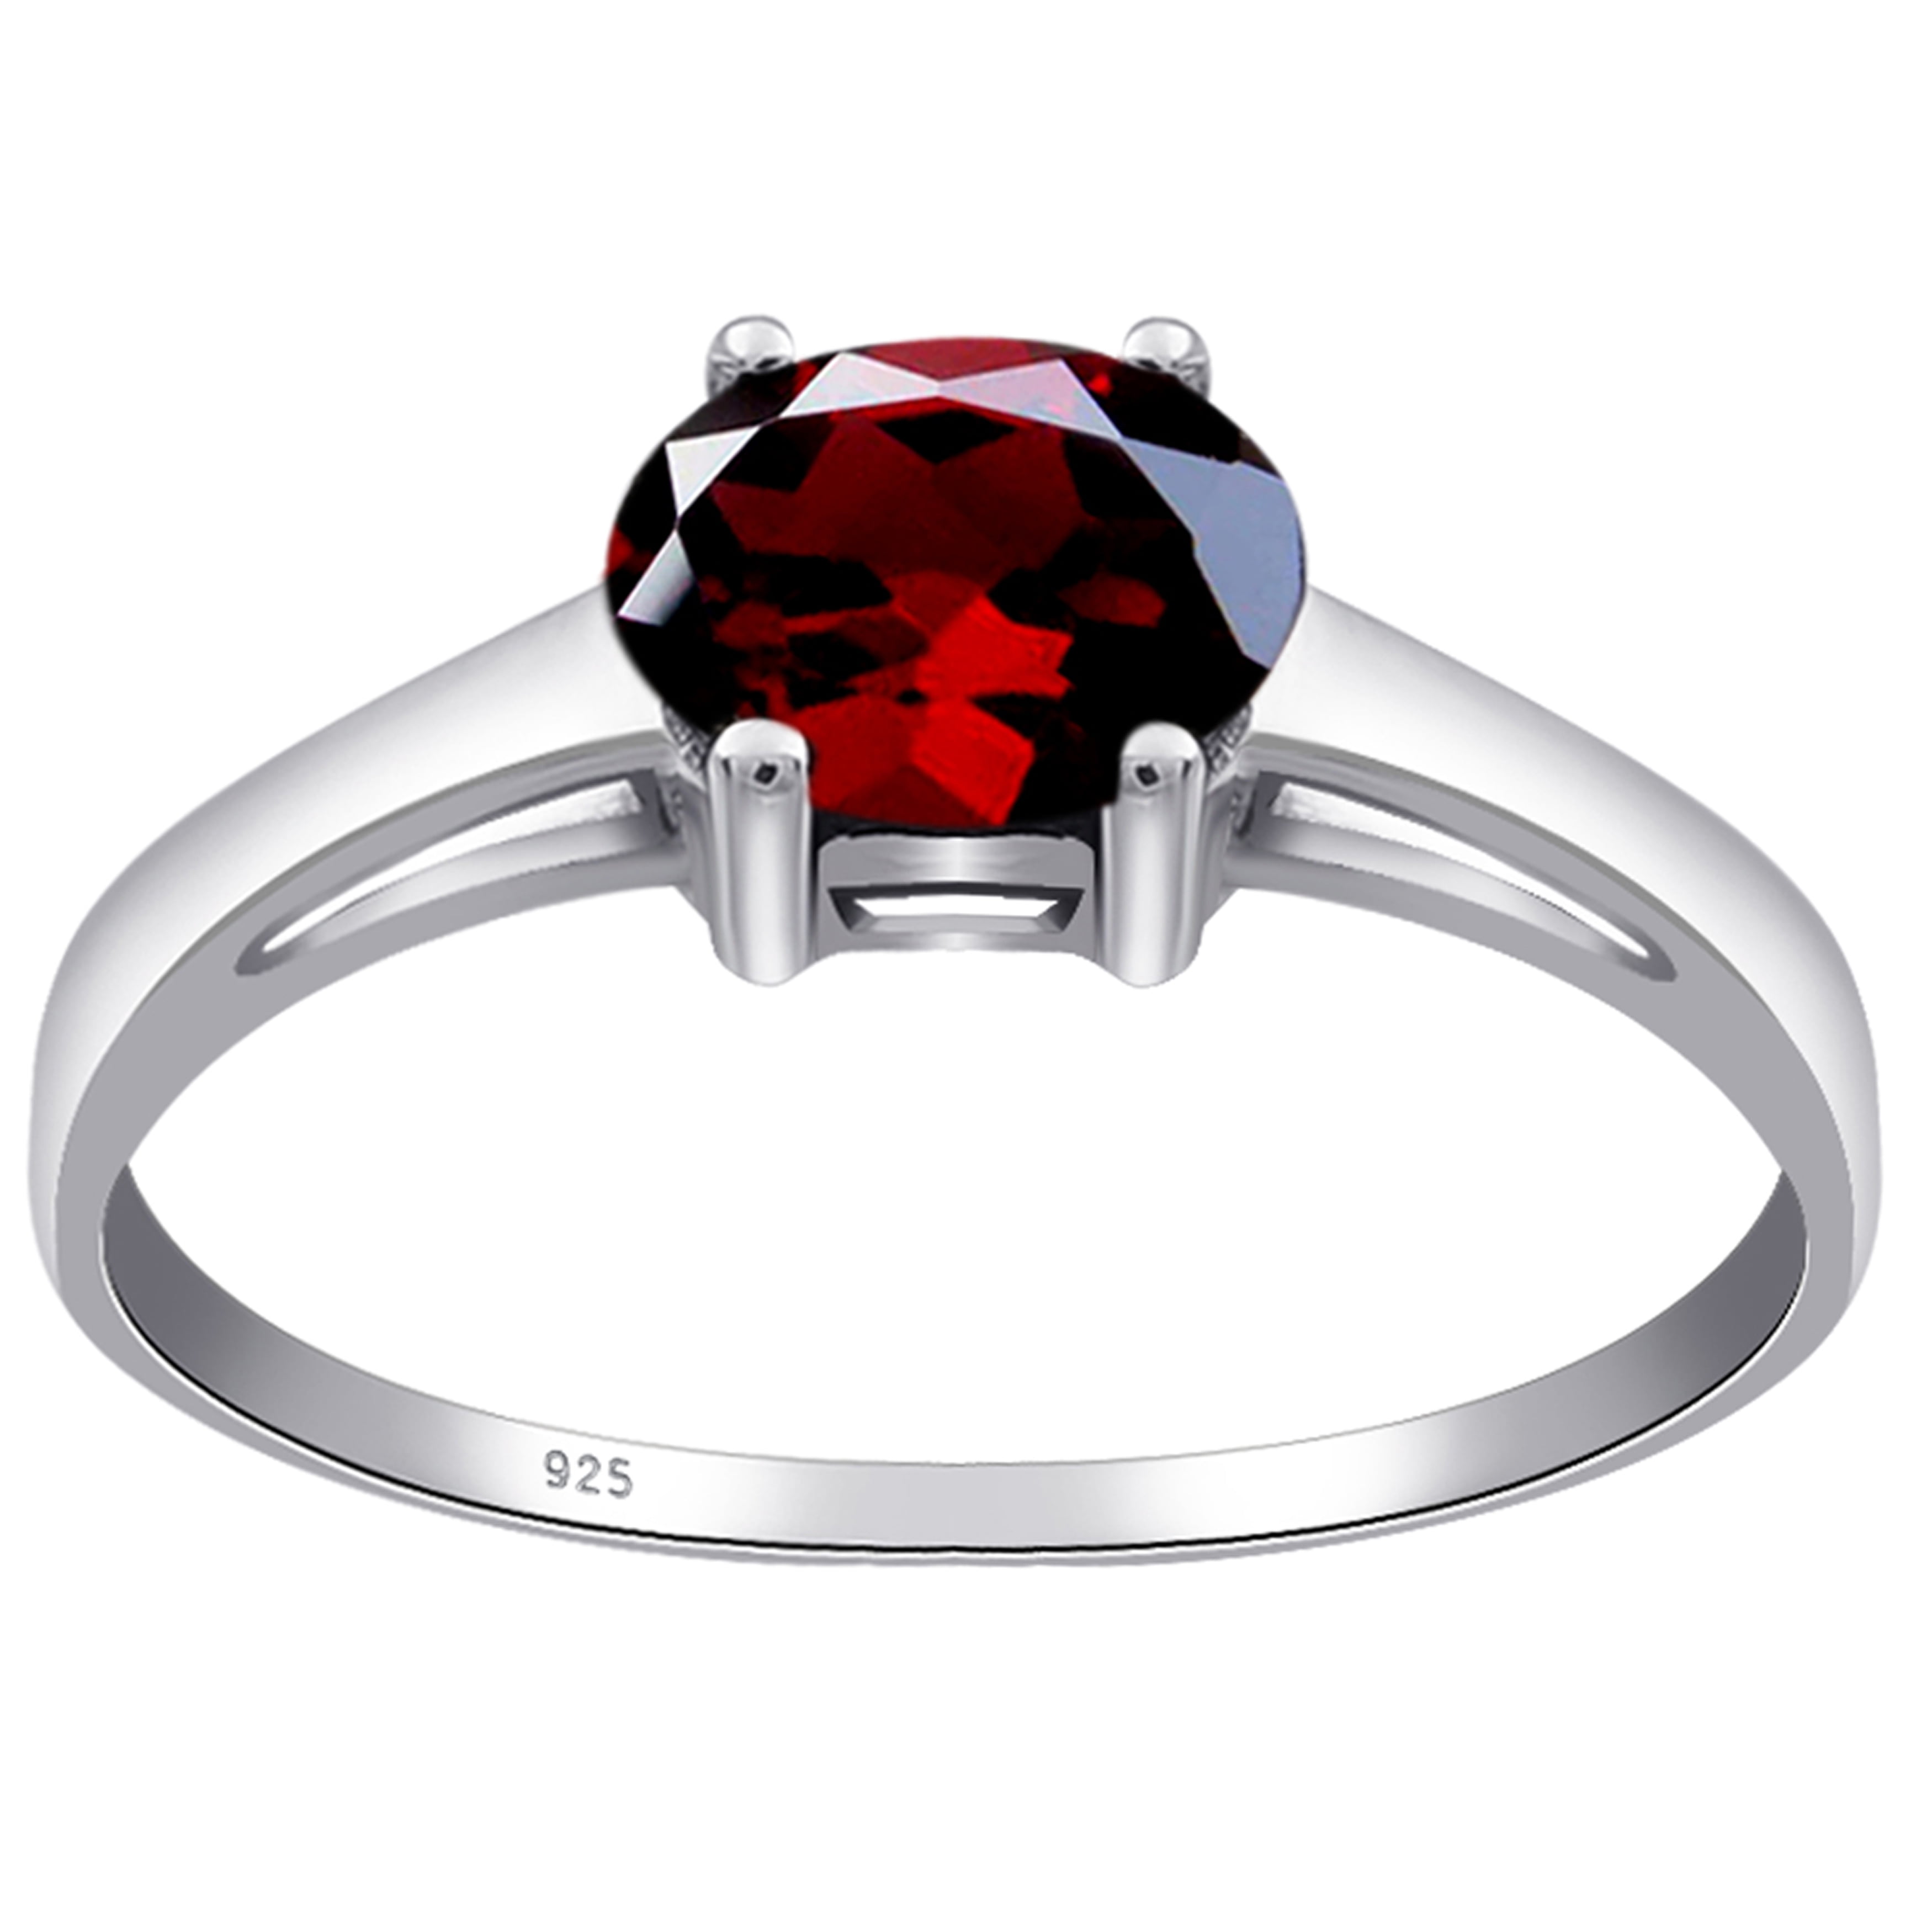 Ladies 925 Sterling Silve 1.25 Ct Round Cut Garnet Solitaire Ring Jewellery Gift 